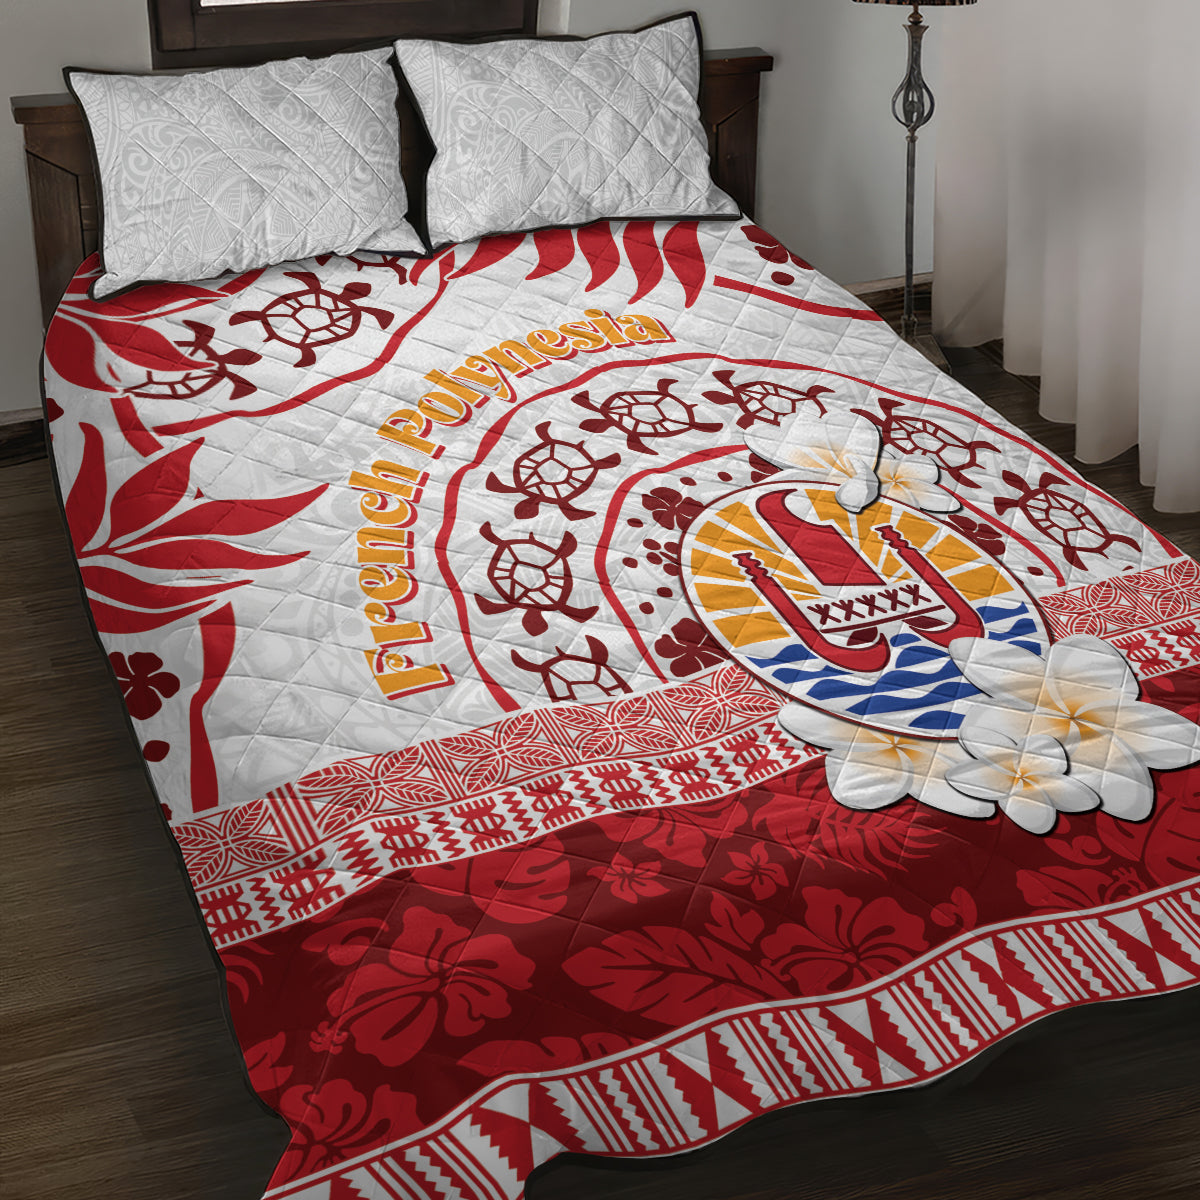 French Polynesia Internal Autonomy Day Quilt Bed Set Tropical Hibiscus And Turtle Pattern